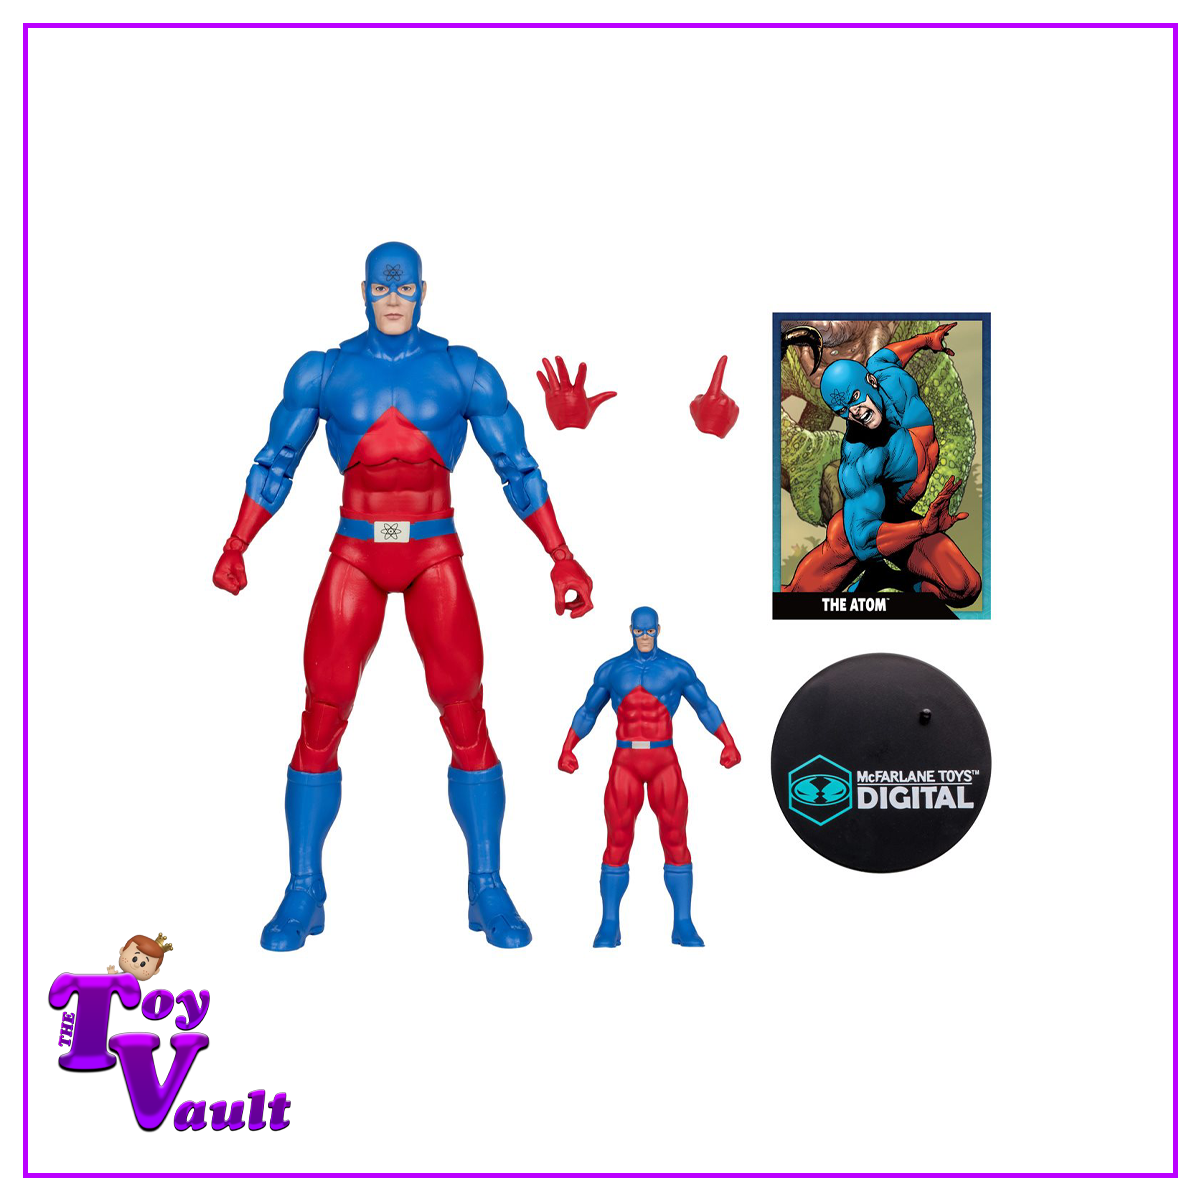 McFarlane Toys DC Direct DC Heroes Justice League The Atom Ray Palmer Silver Age 7-Inch Scale Wave 2 Action Figure with McFarlane Toys Digital Collectible Preorder